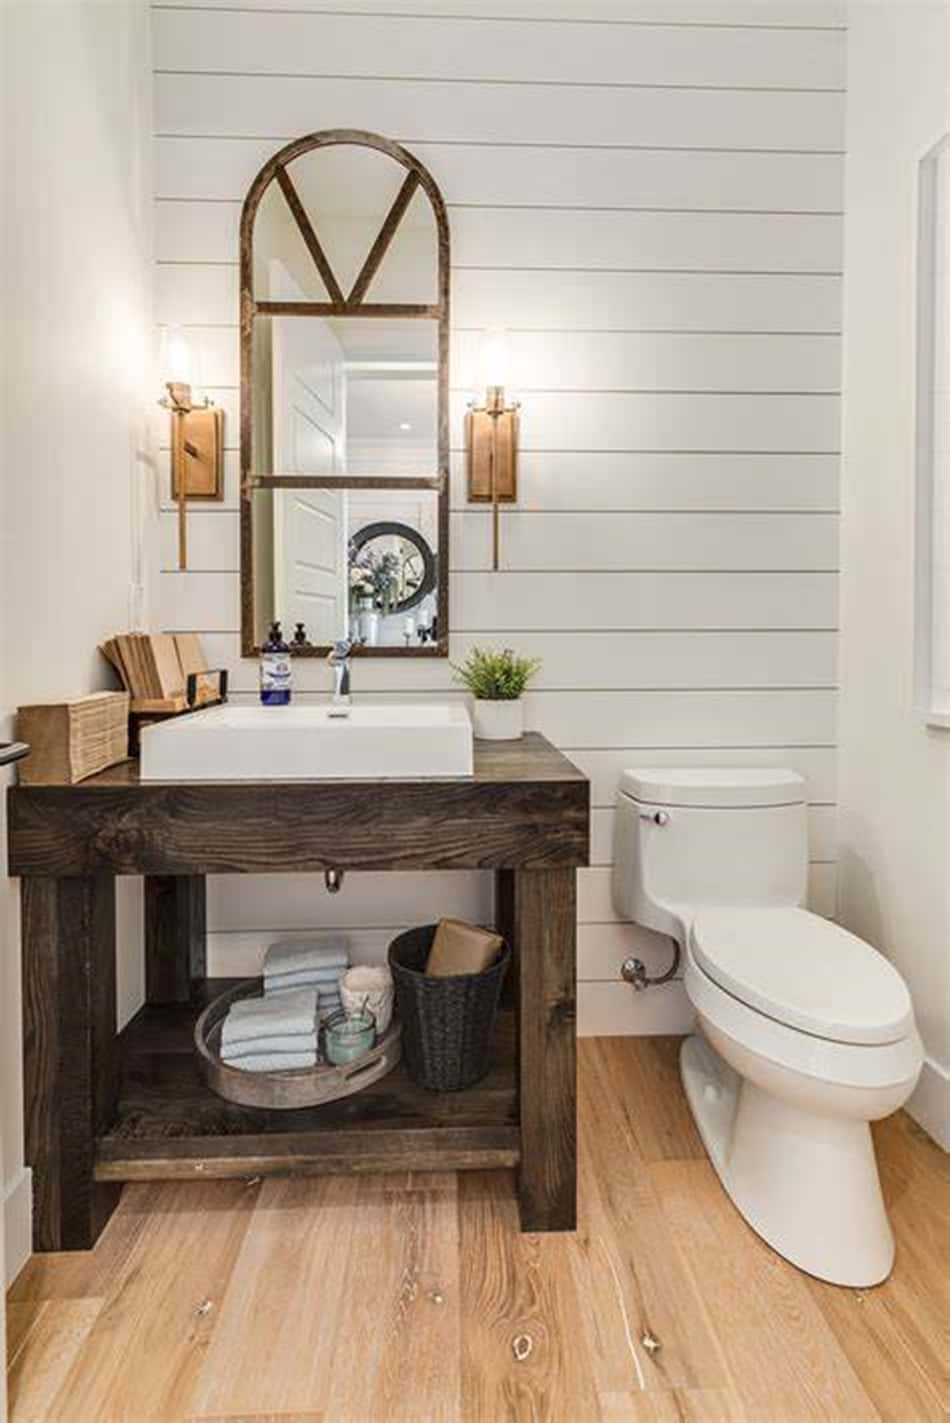 Give your home a rustic look with Shiplap!